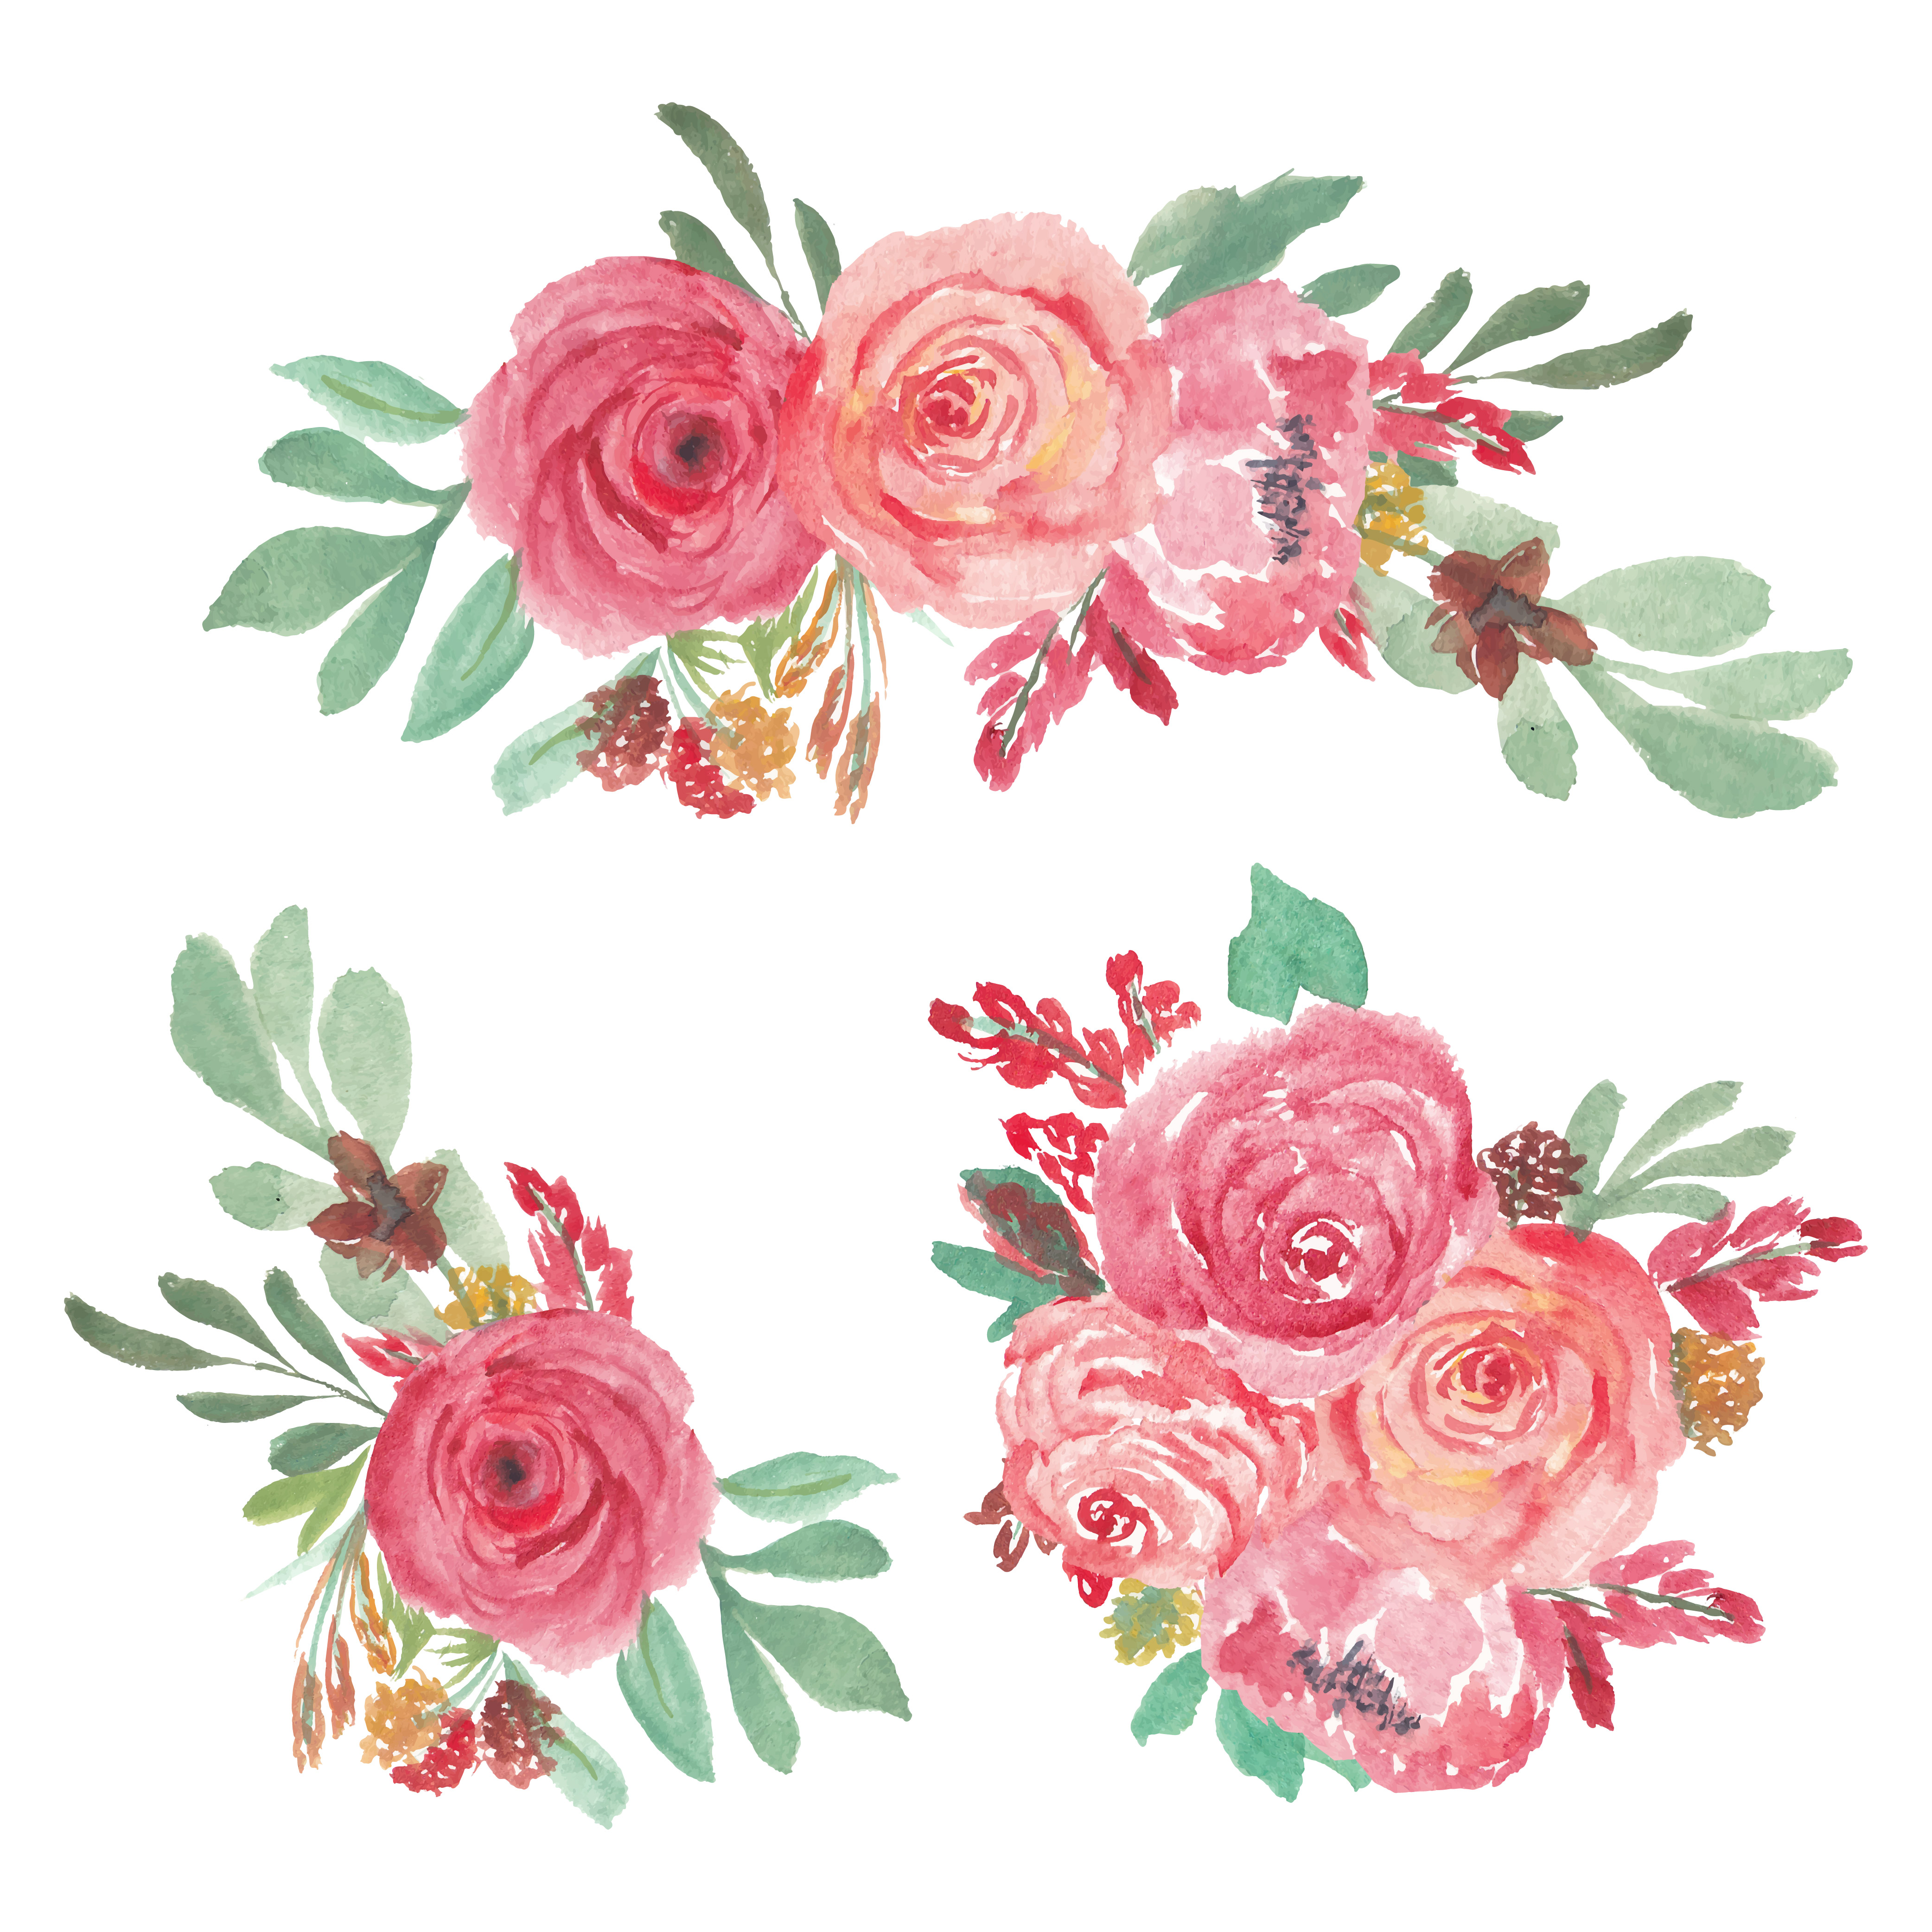 Download Rose Floral Arrangement Collection in Watercolor Painting ...